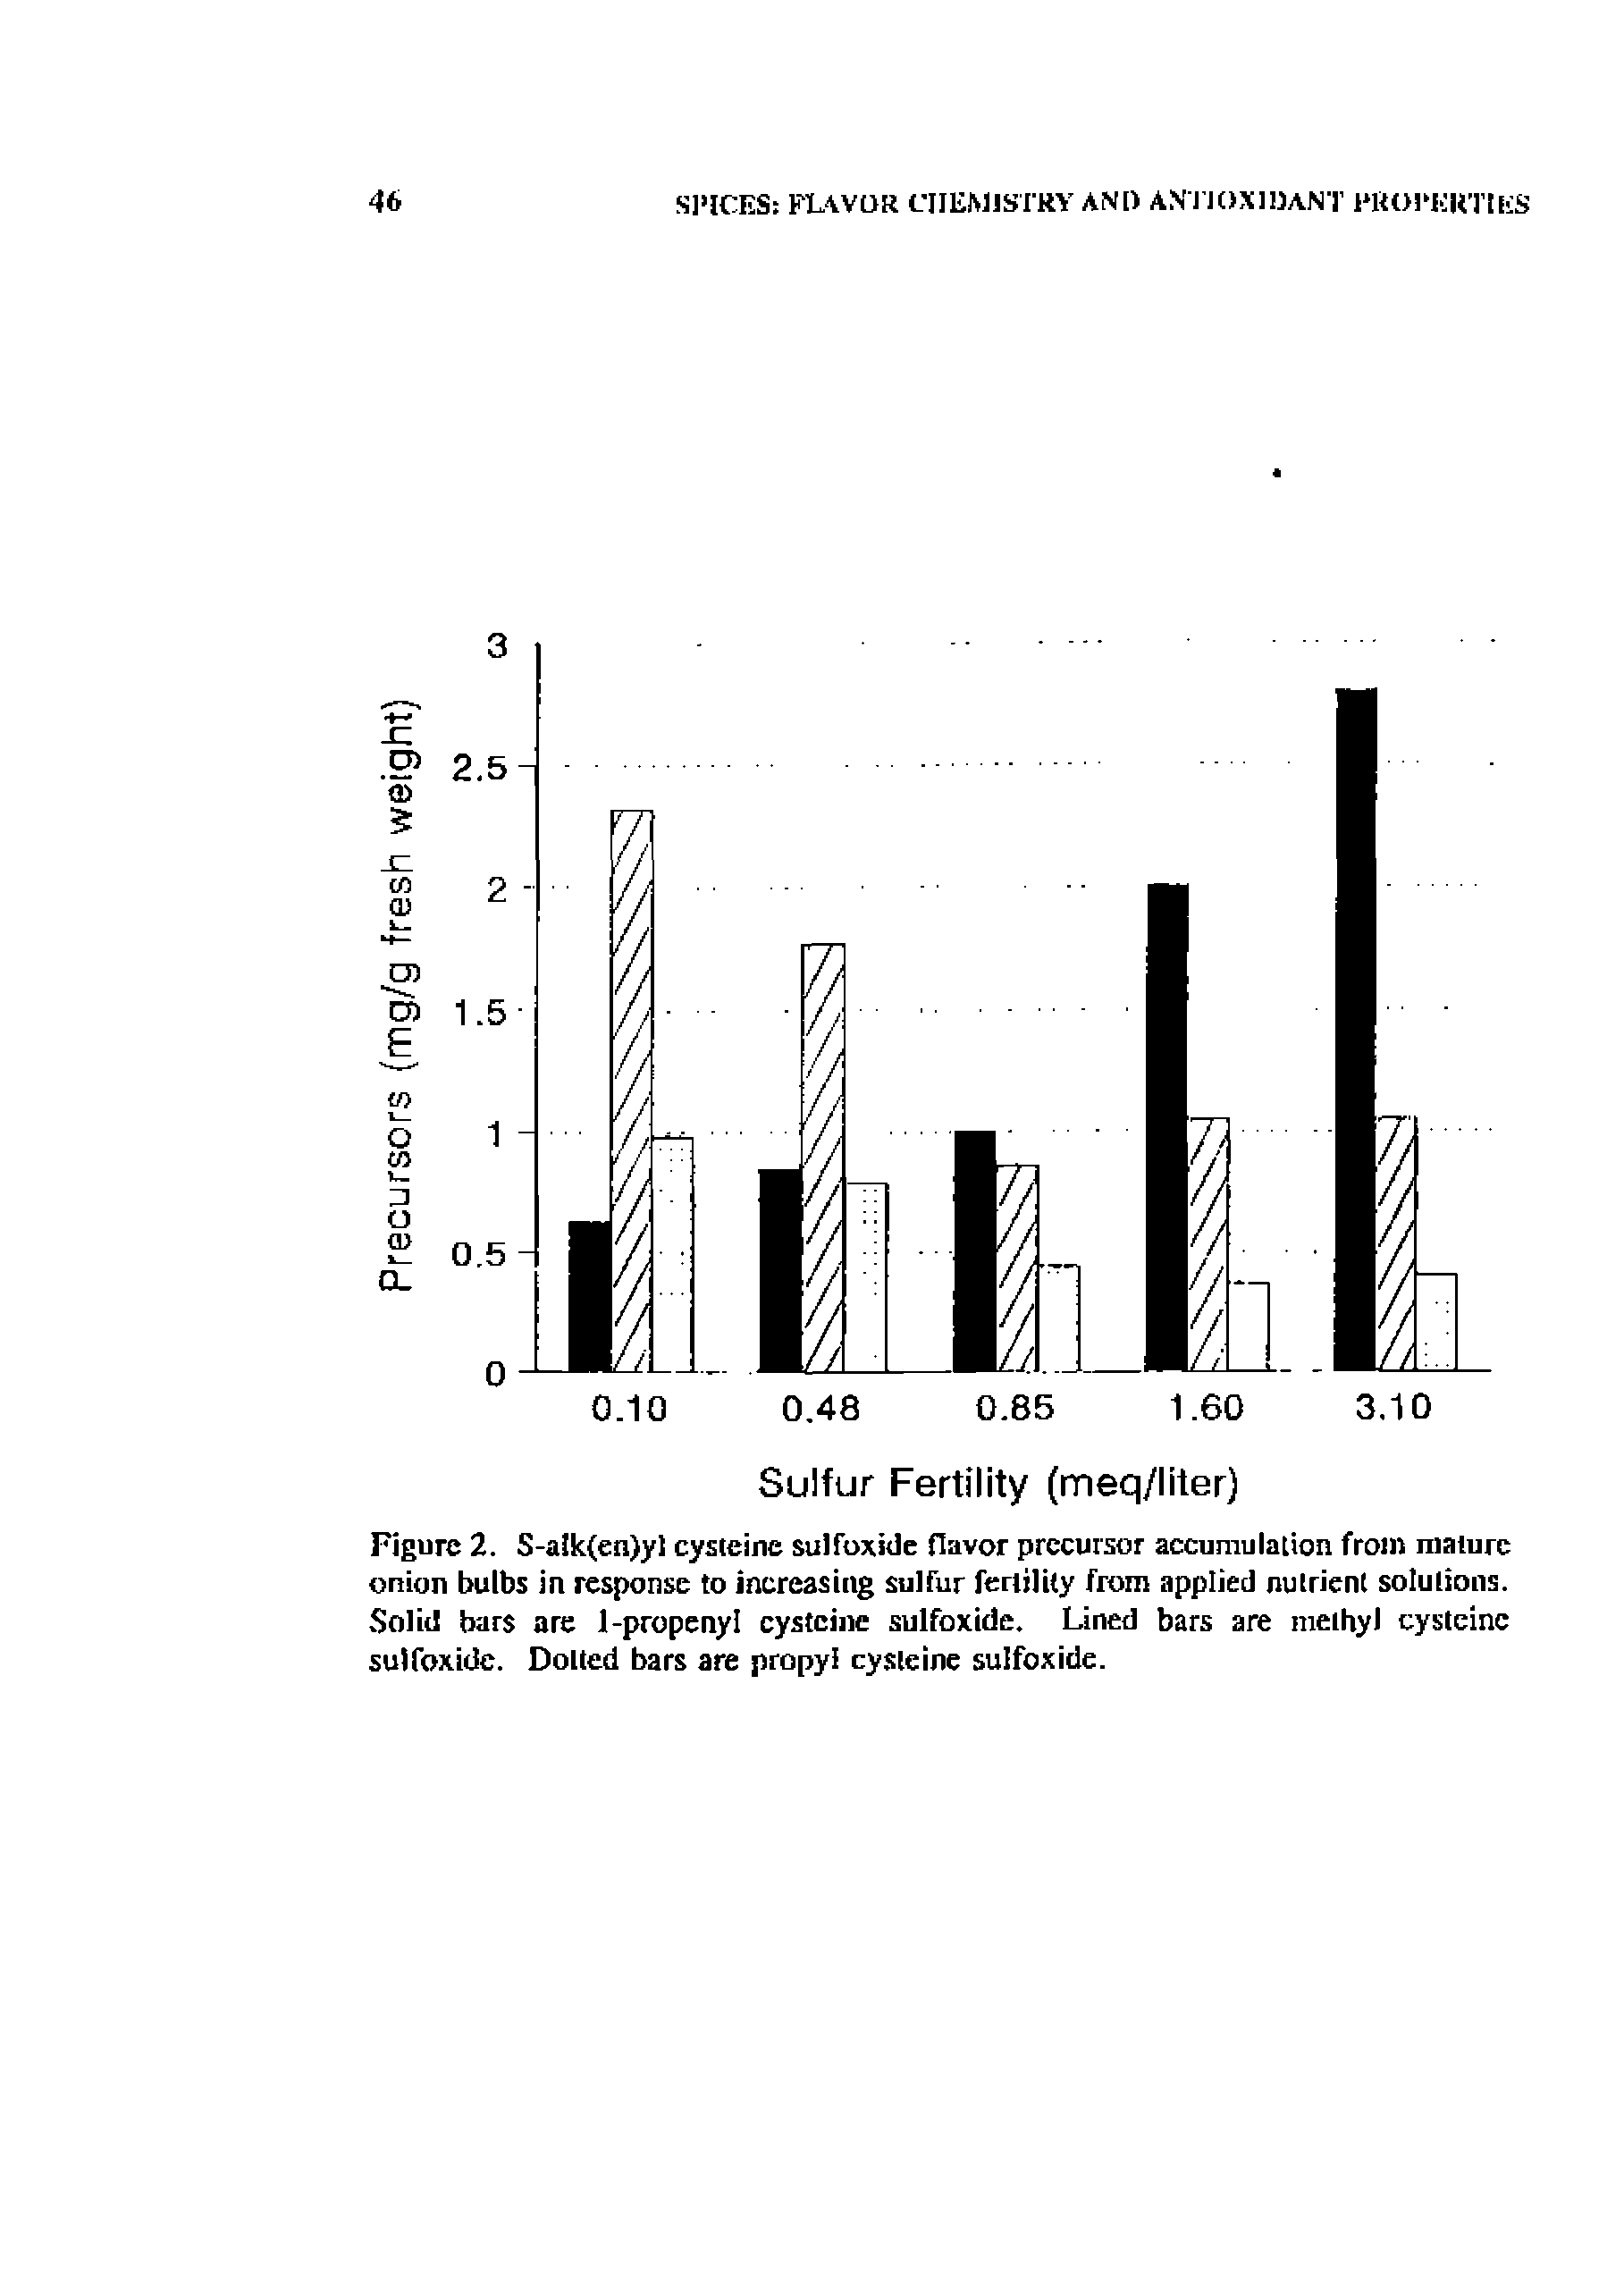 Figure 2. S-alk(en)yl cysteine sulfoxide flavor precursor accumulation from mature onion bulbs in response to increasing sulfur feriilily from applied nutrient solutions. Solid bars are 1-propenyI cysteine sulfoxide. Lined bars are methyl cysteine sulfoxide. Doited bars are propyl cysteine sulfoxide.